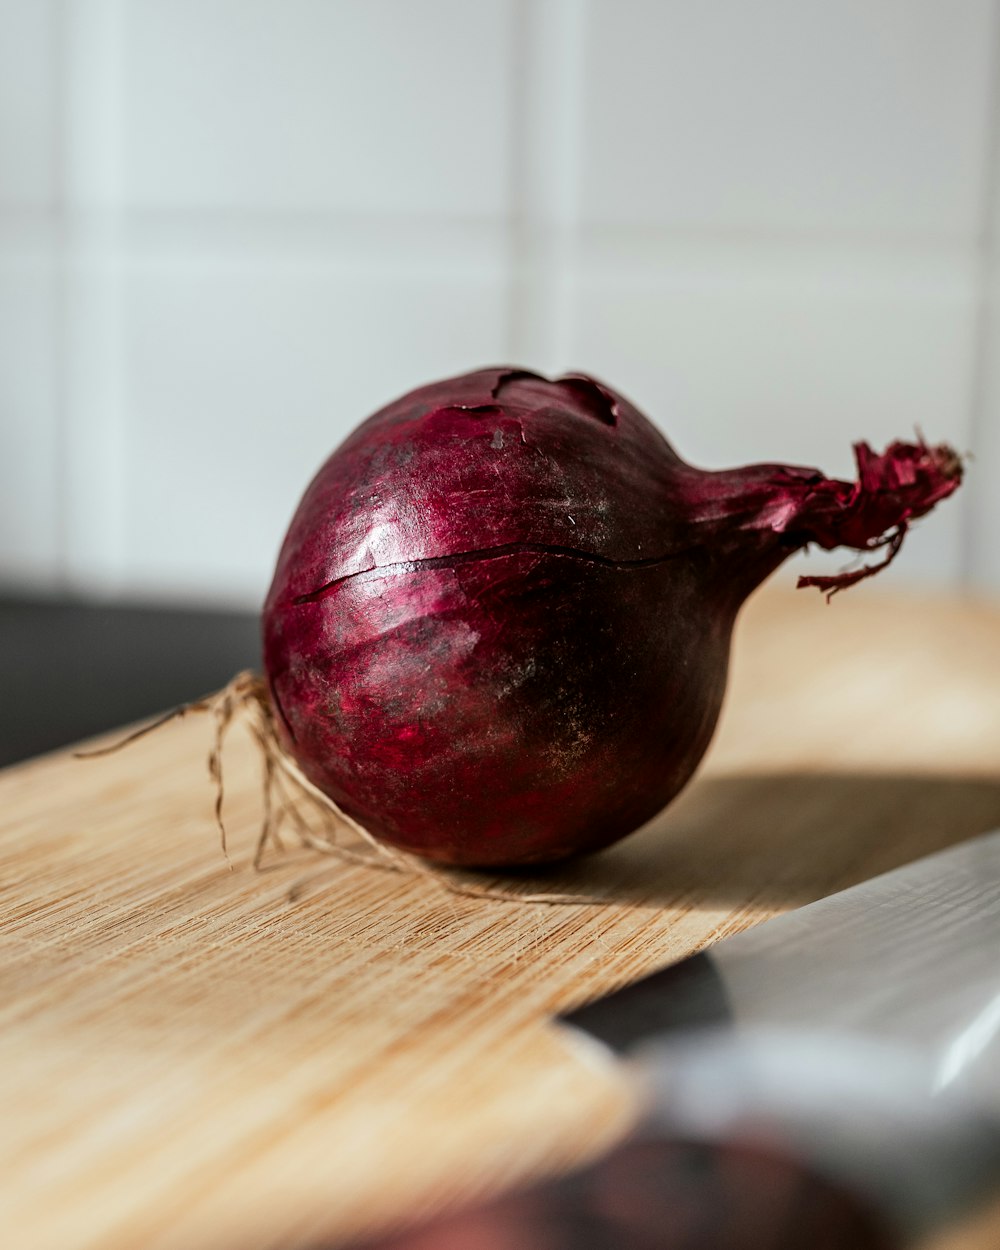 a red onion on a wooden surface